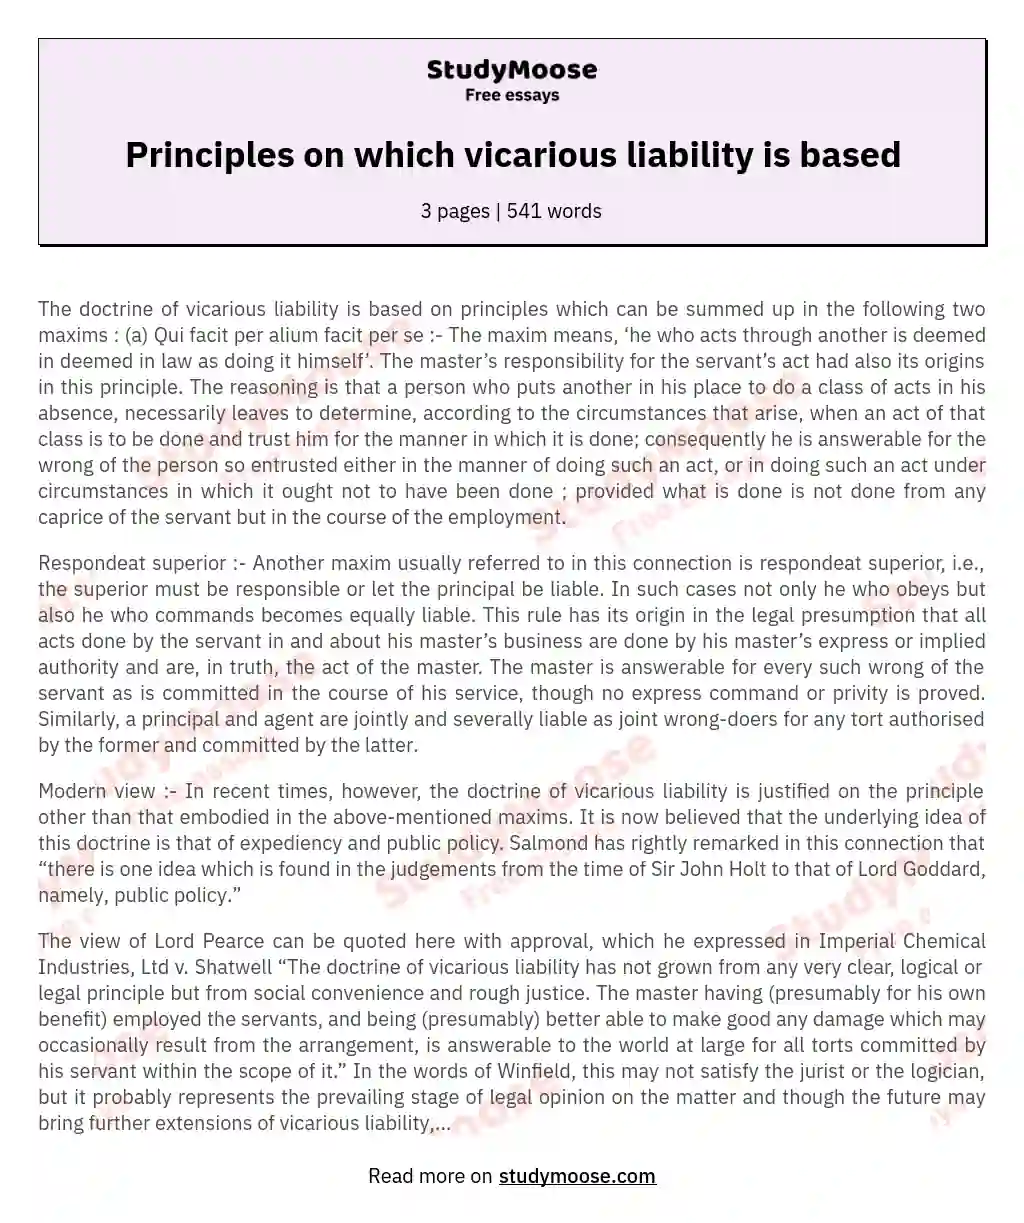 Principles on which vicarious liability is based essay